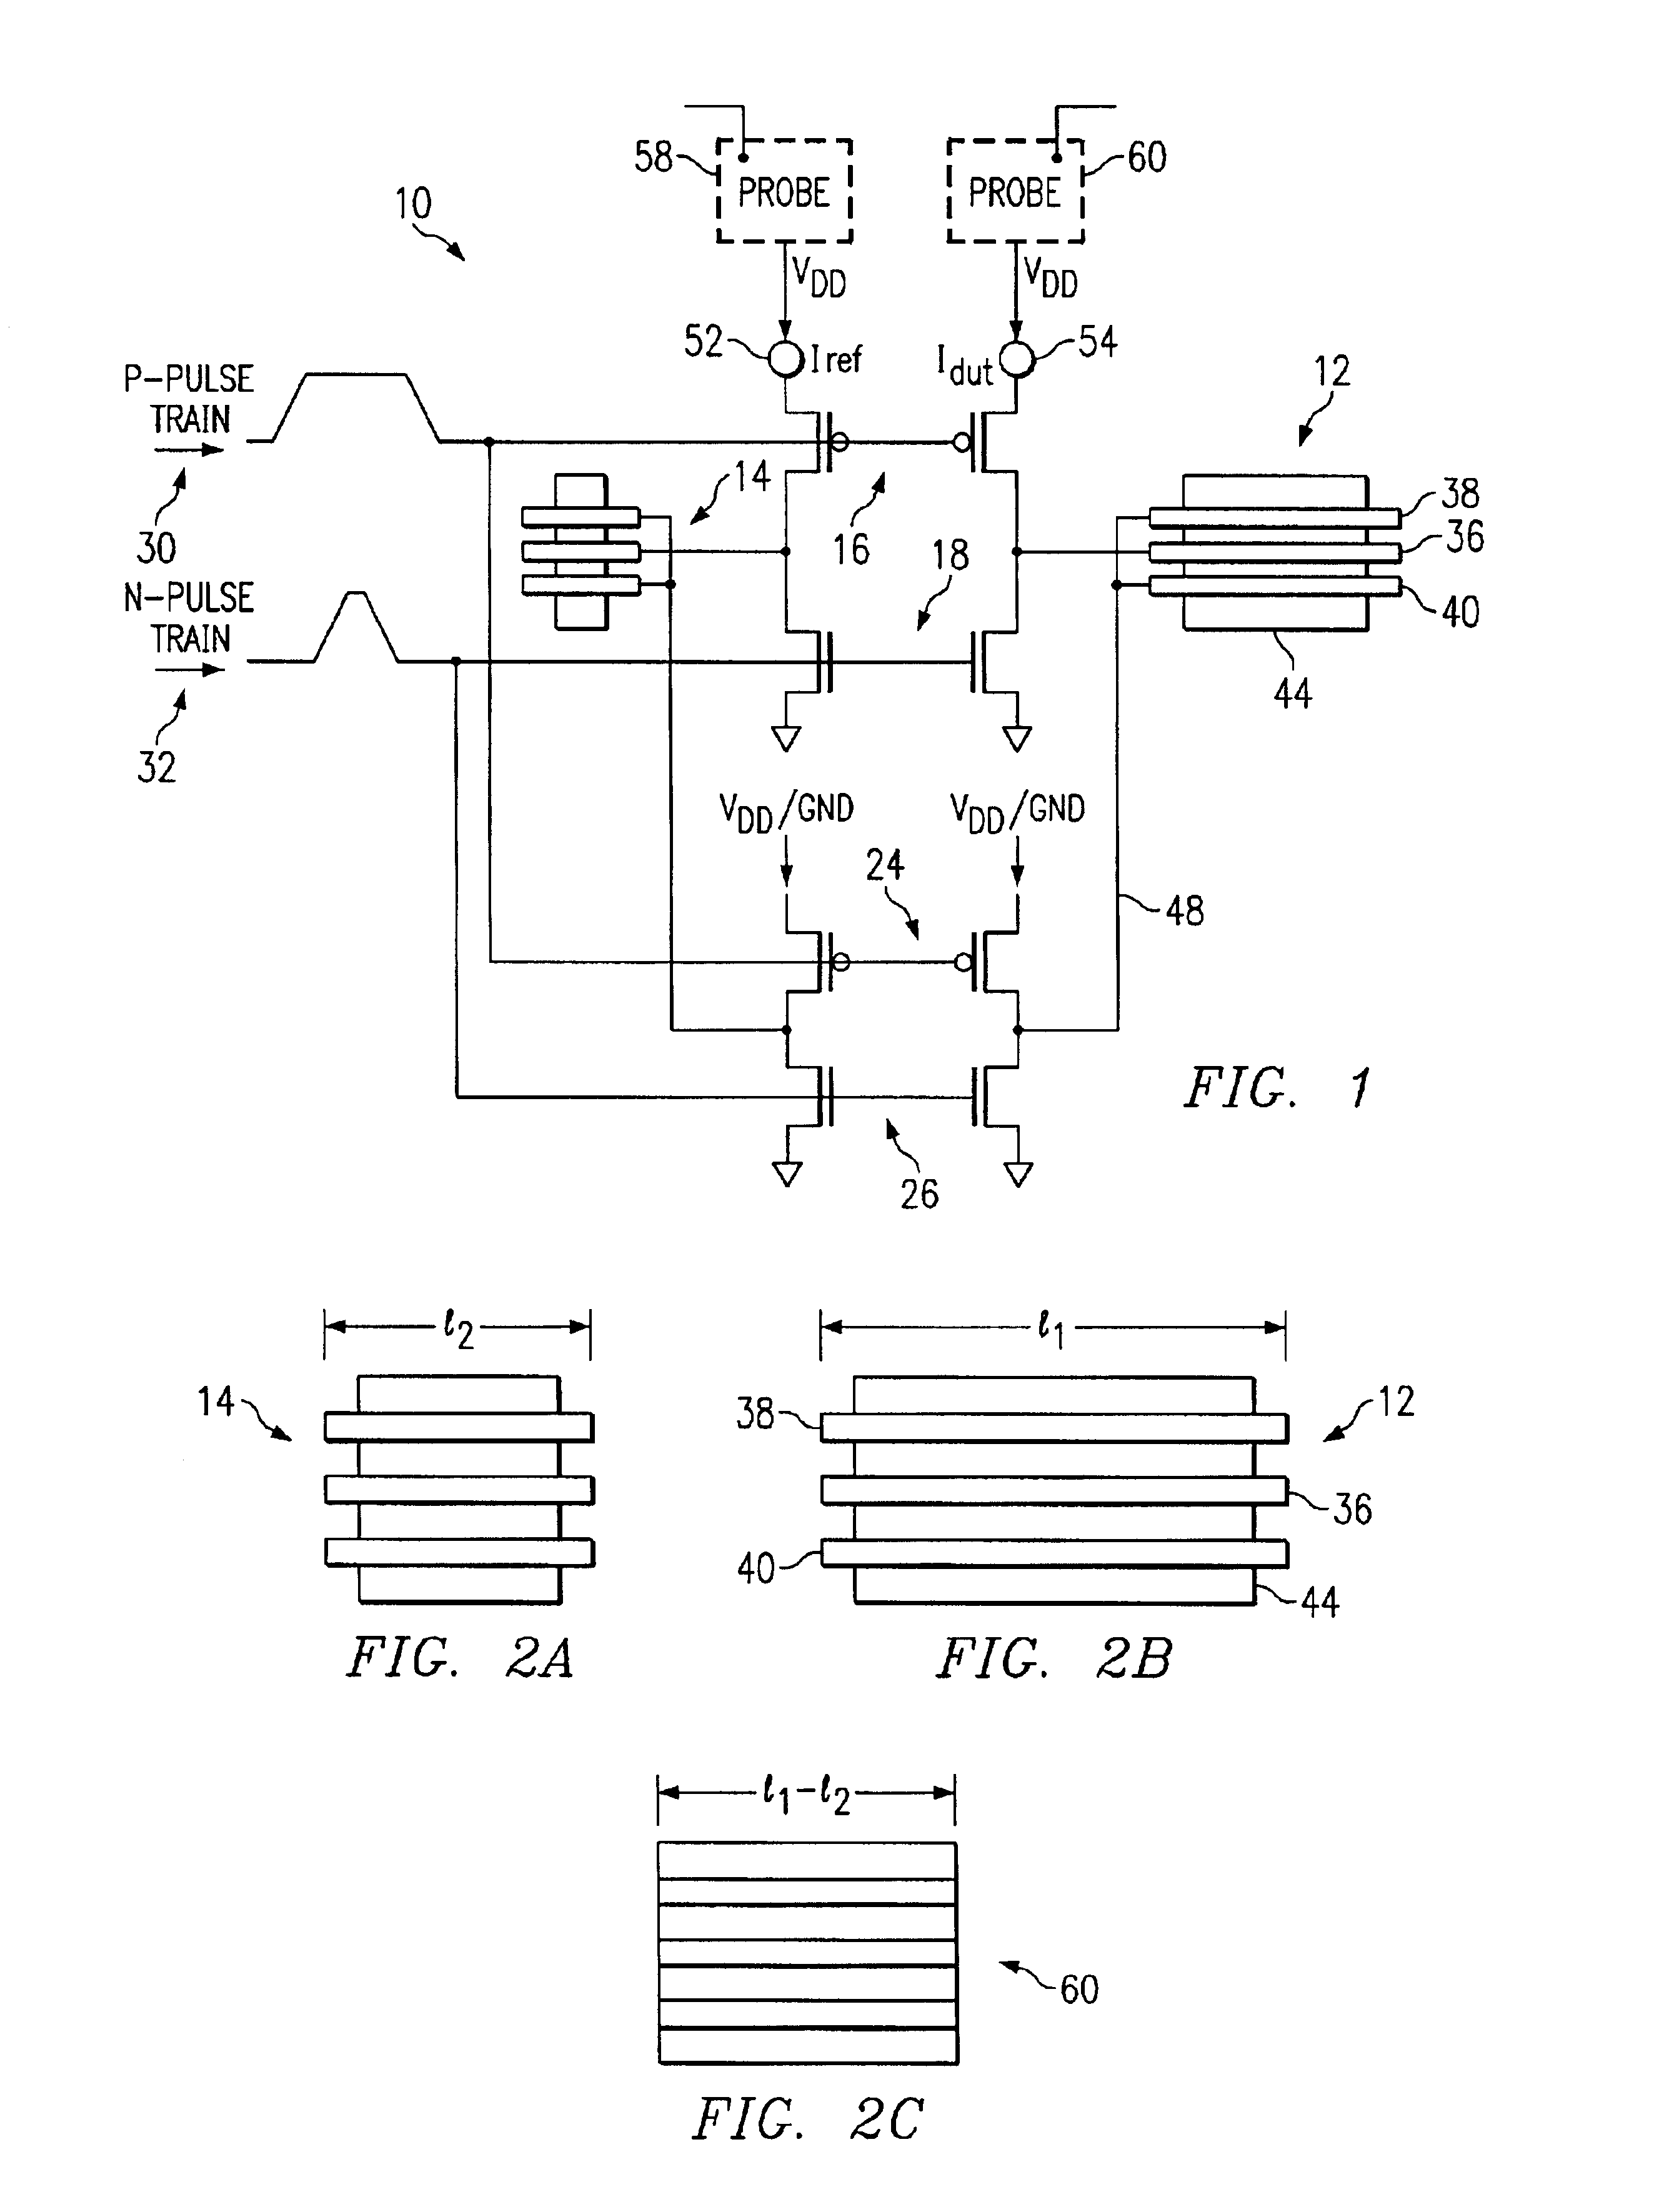 System and method for measuring a capacitance of a conductor